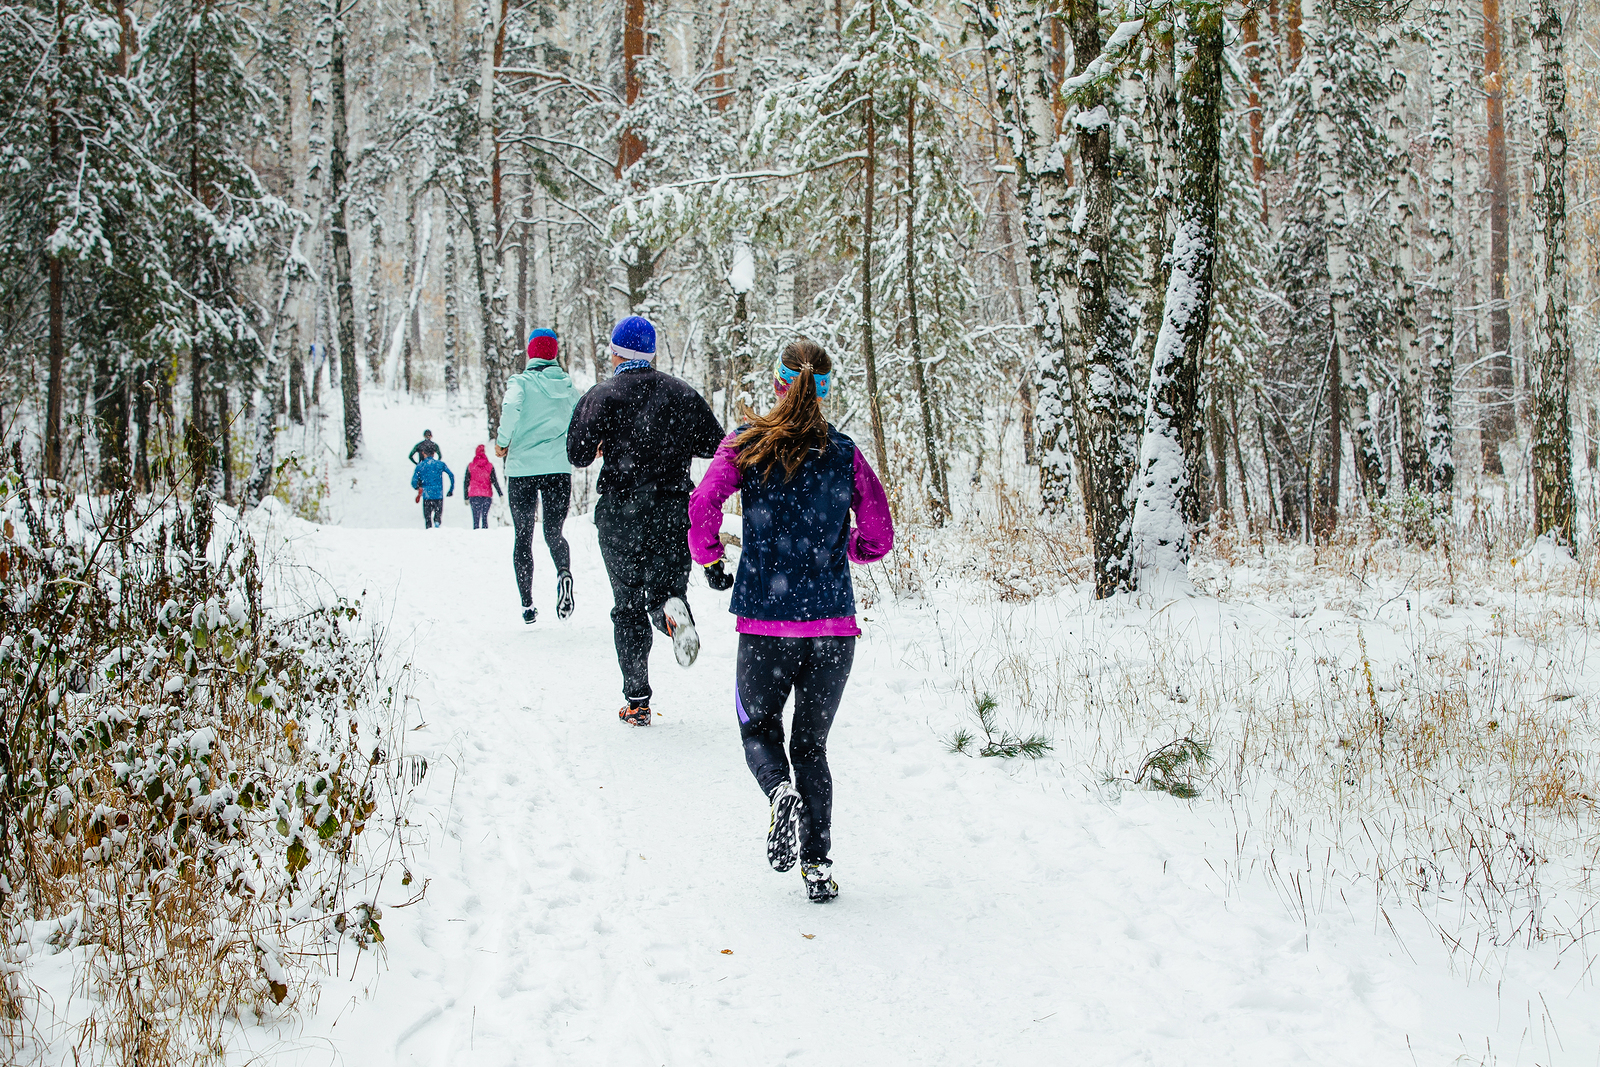 5 Reasons to Spend More Time Outdoors (Even When It's Colder) - Amendo